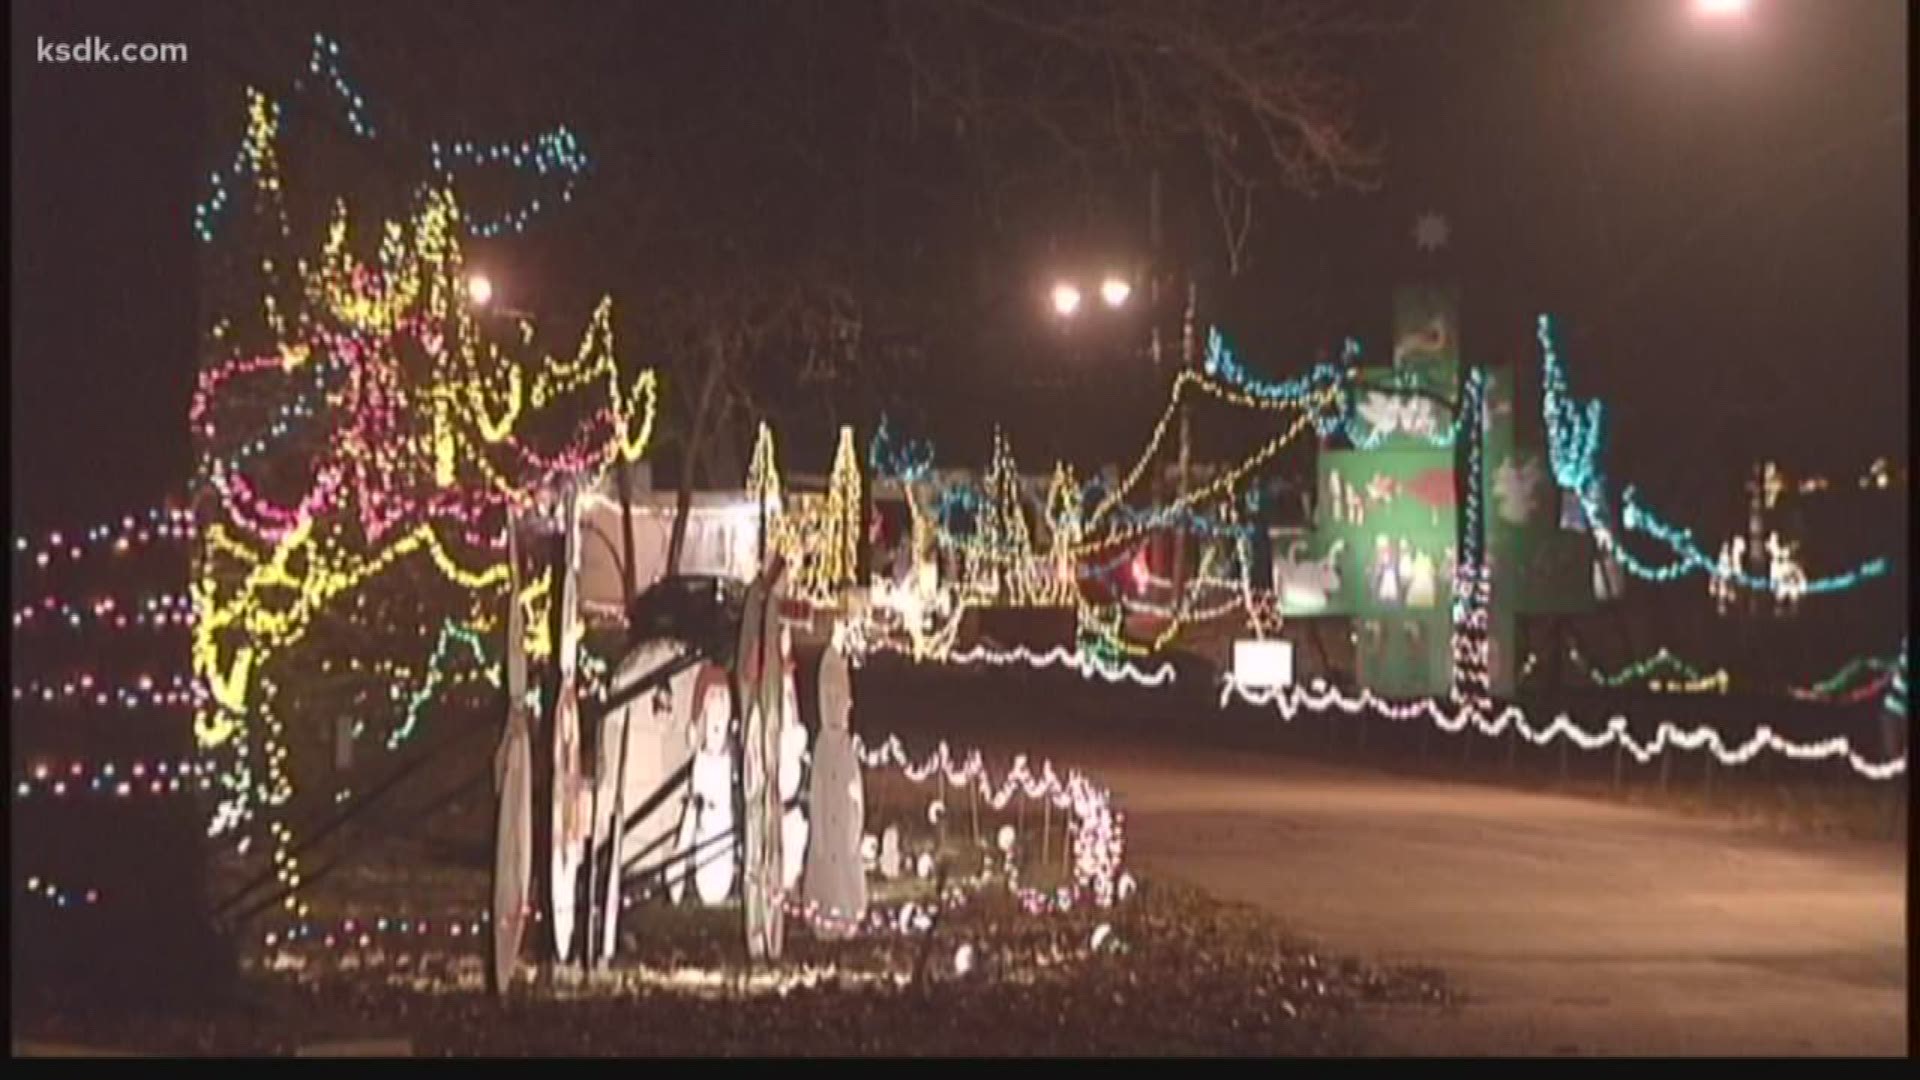 Every year on Black Friday, the gang lights up Rock Springs Park in Alton.